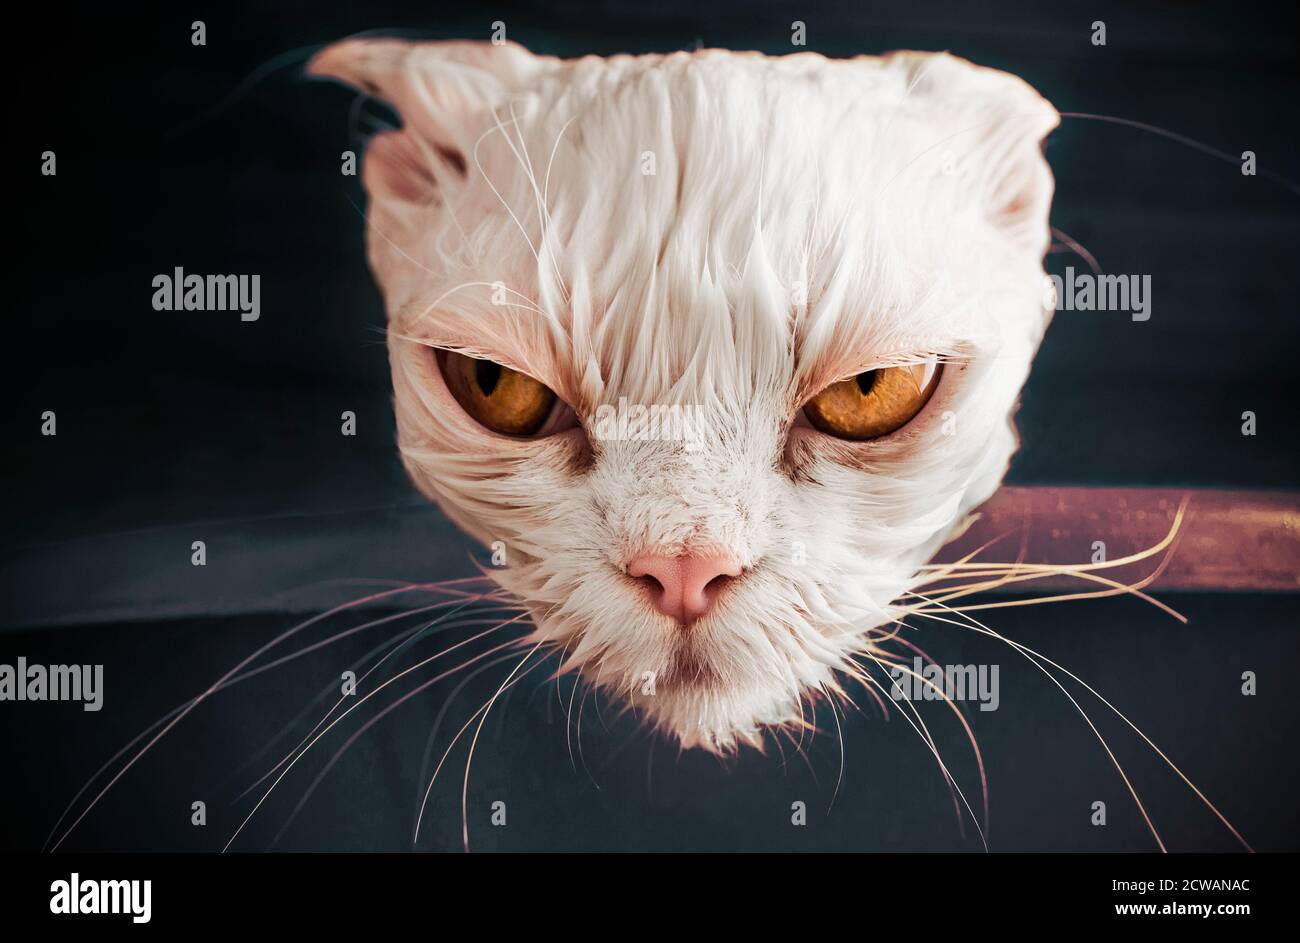 Funny mad cat after a bath Stock Photo - Alamy